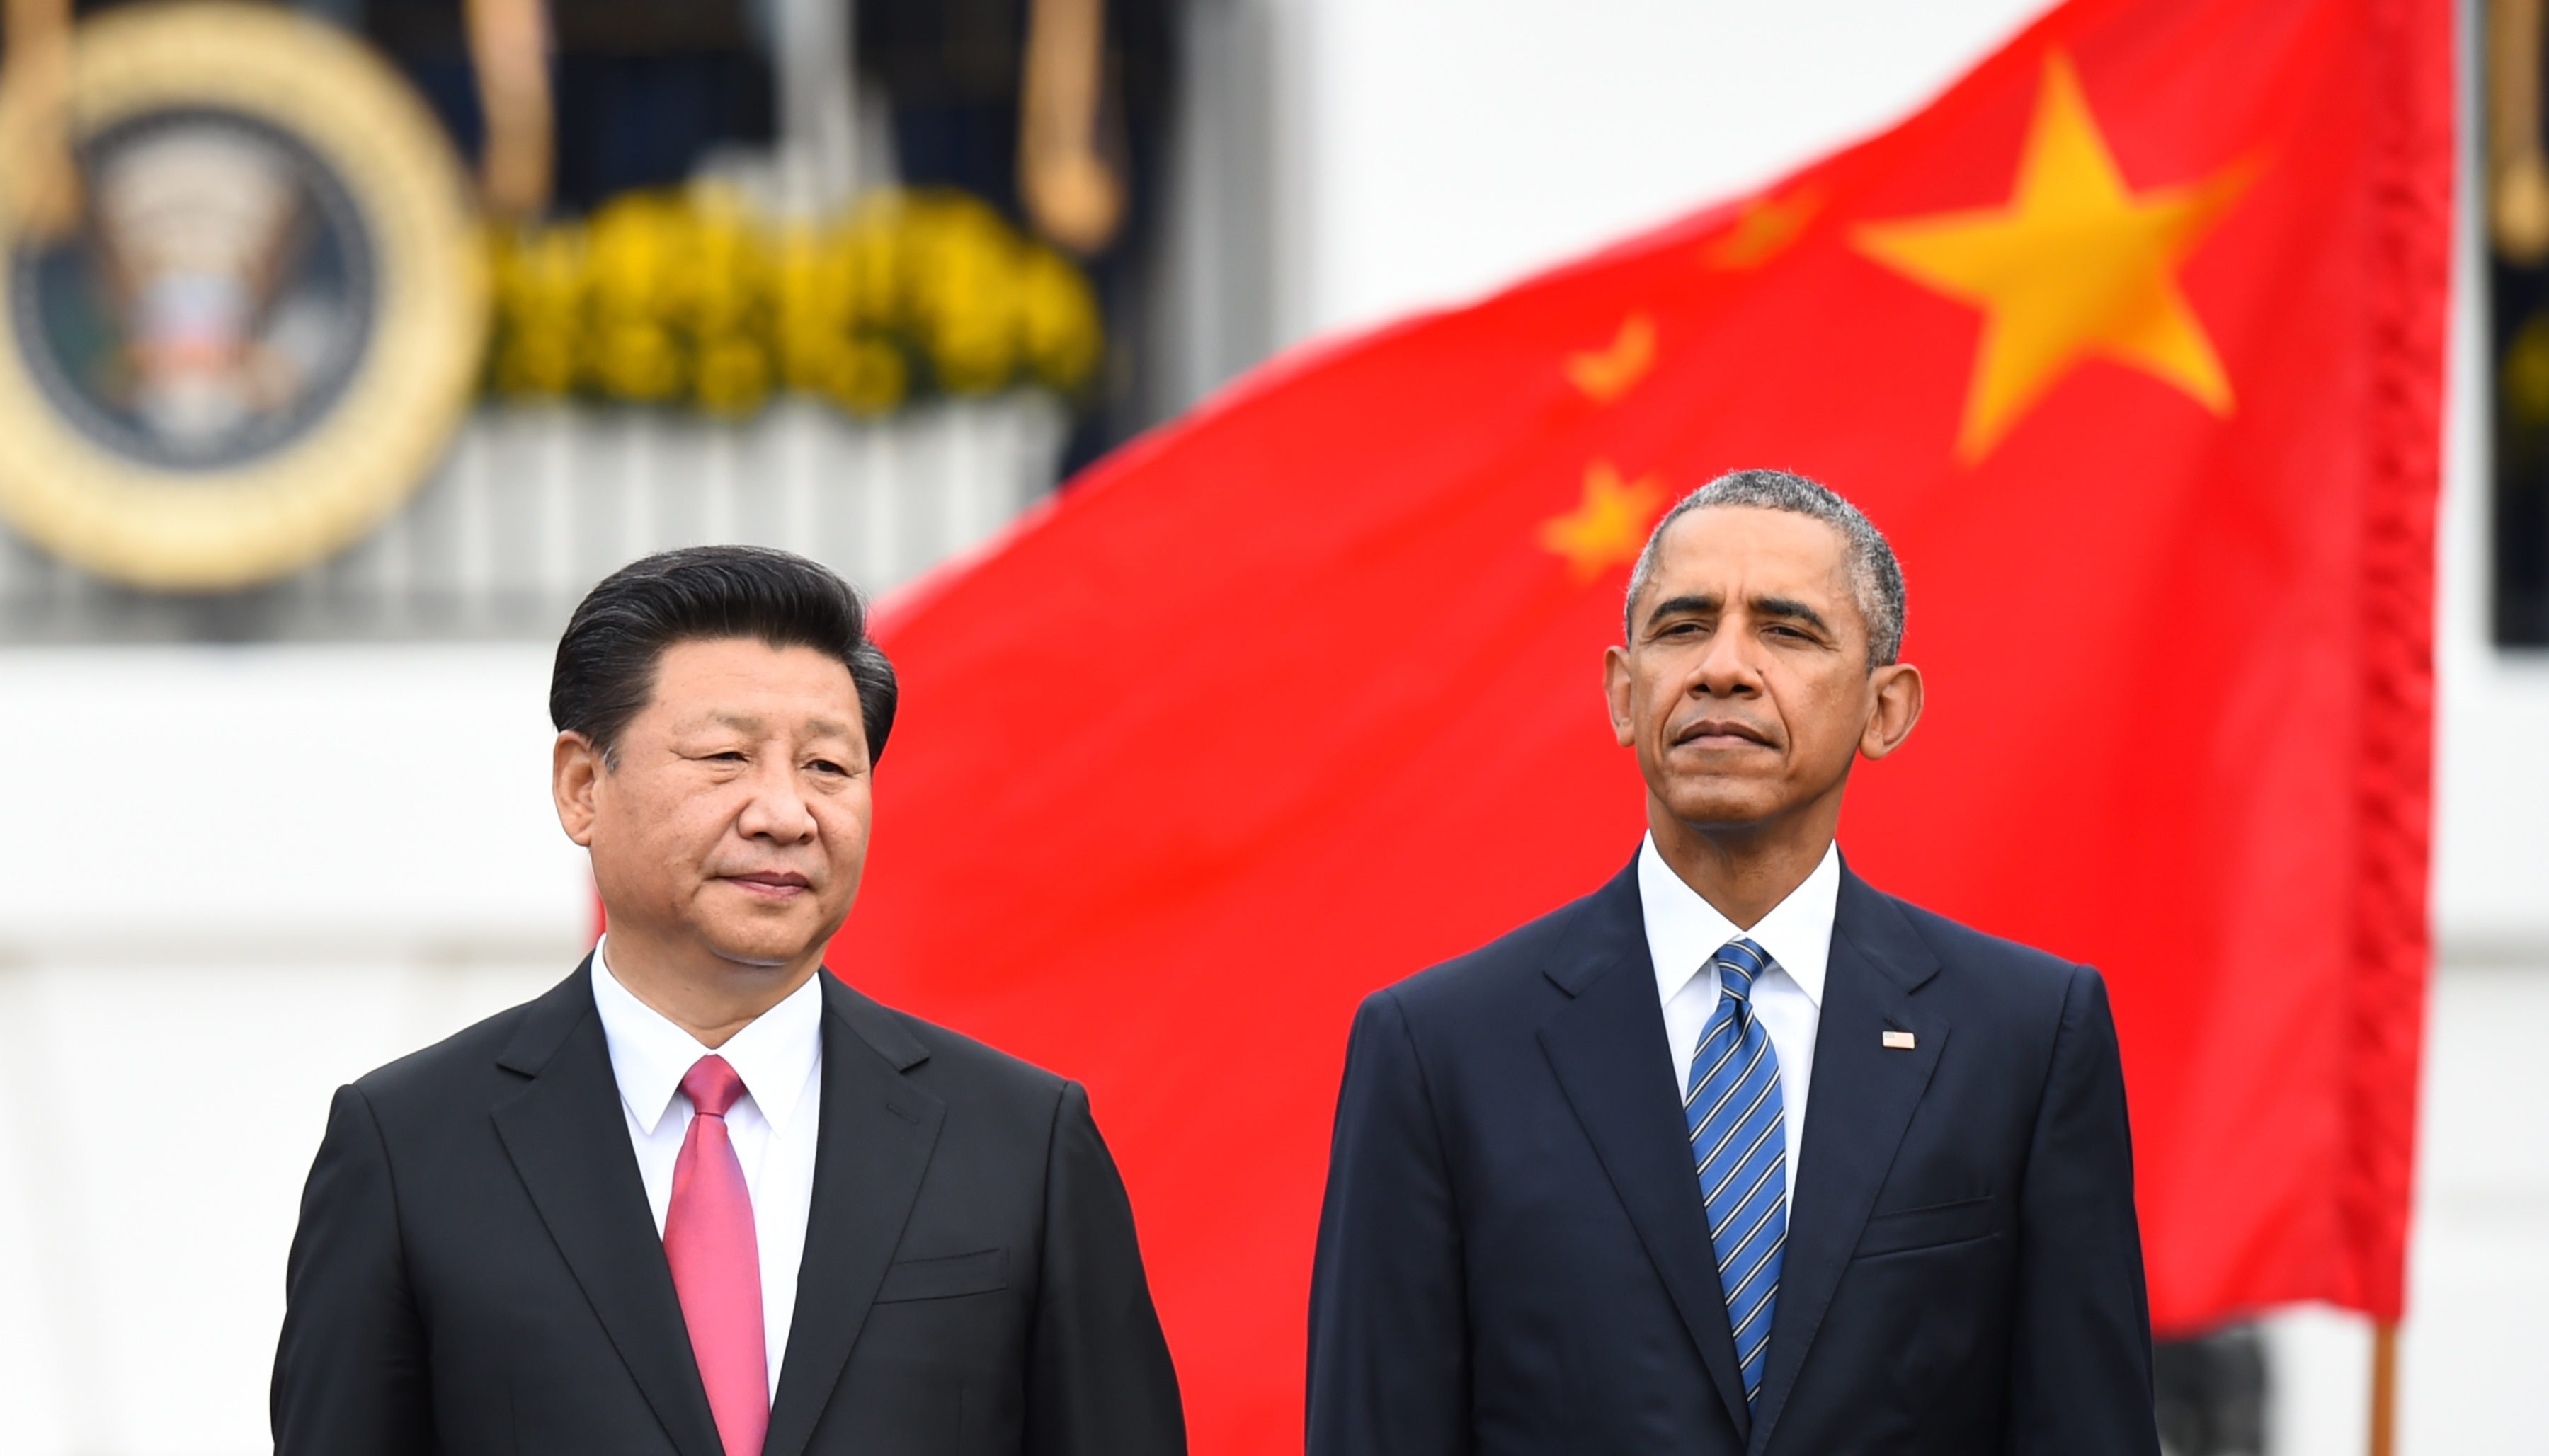 US President Obama hosts Chinese President Xi Jinping at the White House for a State visit on September 25, 2015 in Washington,DC. AFP PHOTO/JIM WATSON